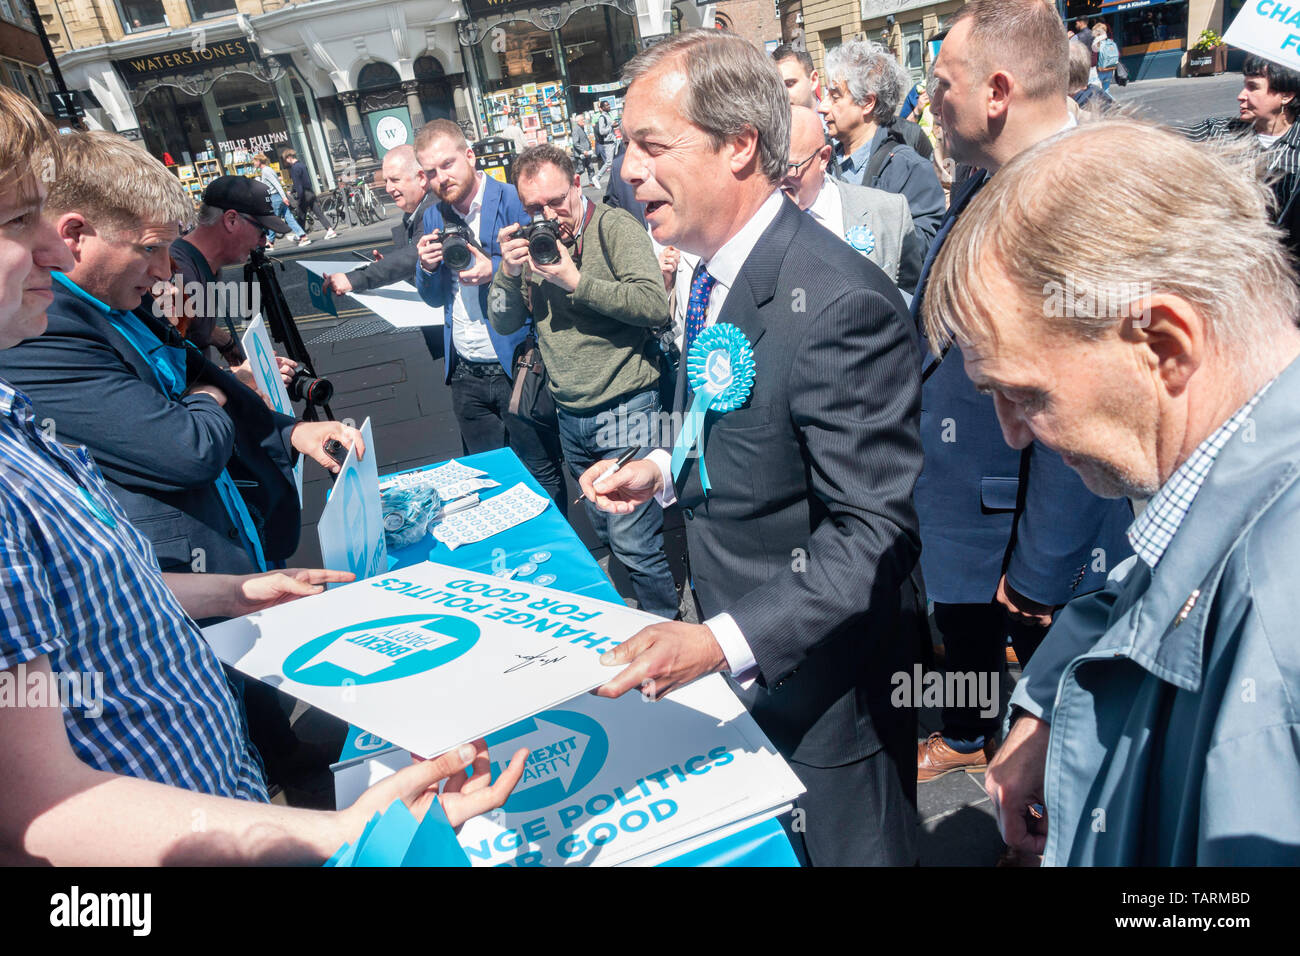 Newcastle upon Tyne, UK. 20th May 2019. UK. Nigel Farage meeting fellow Brexit Party members Stock Photo